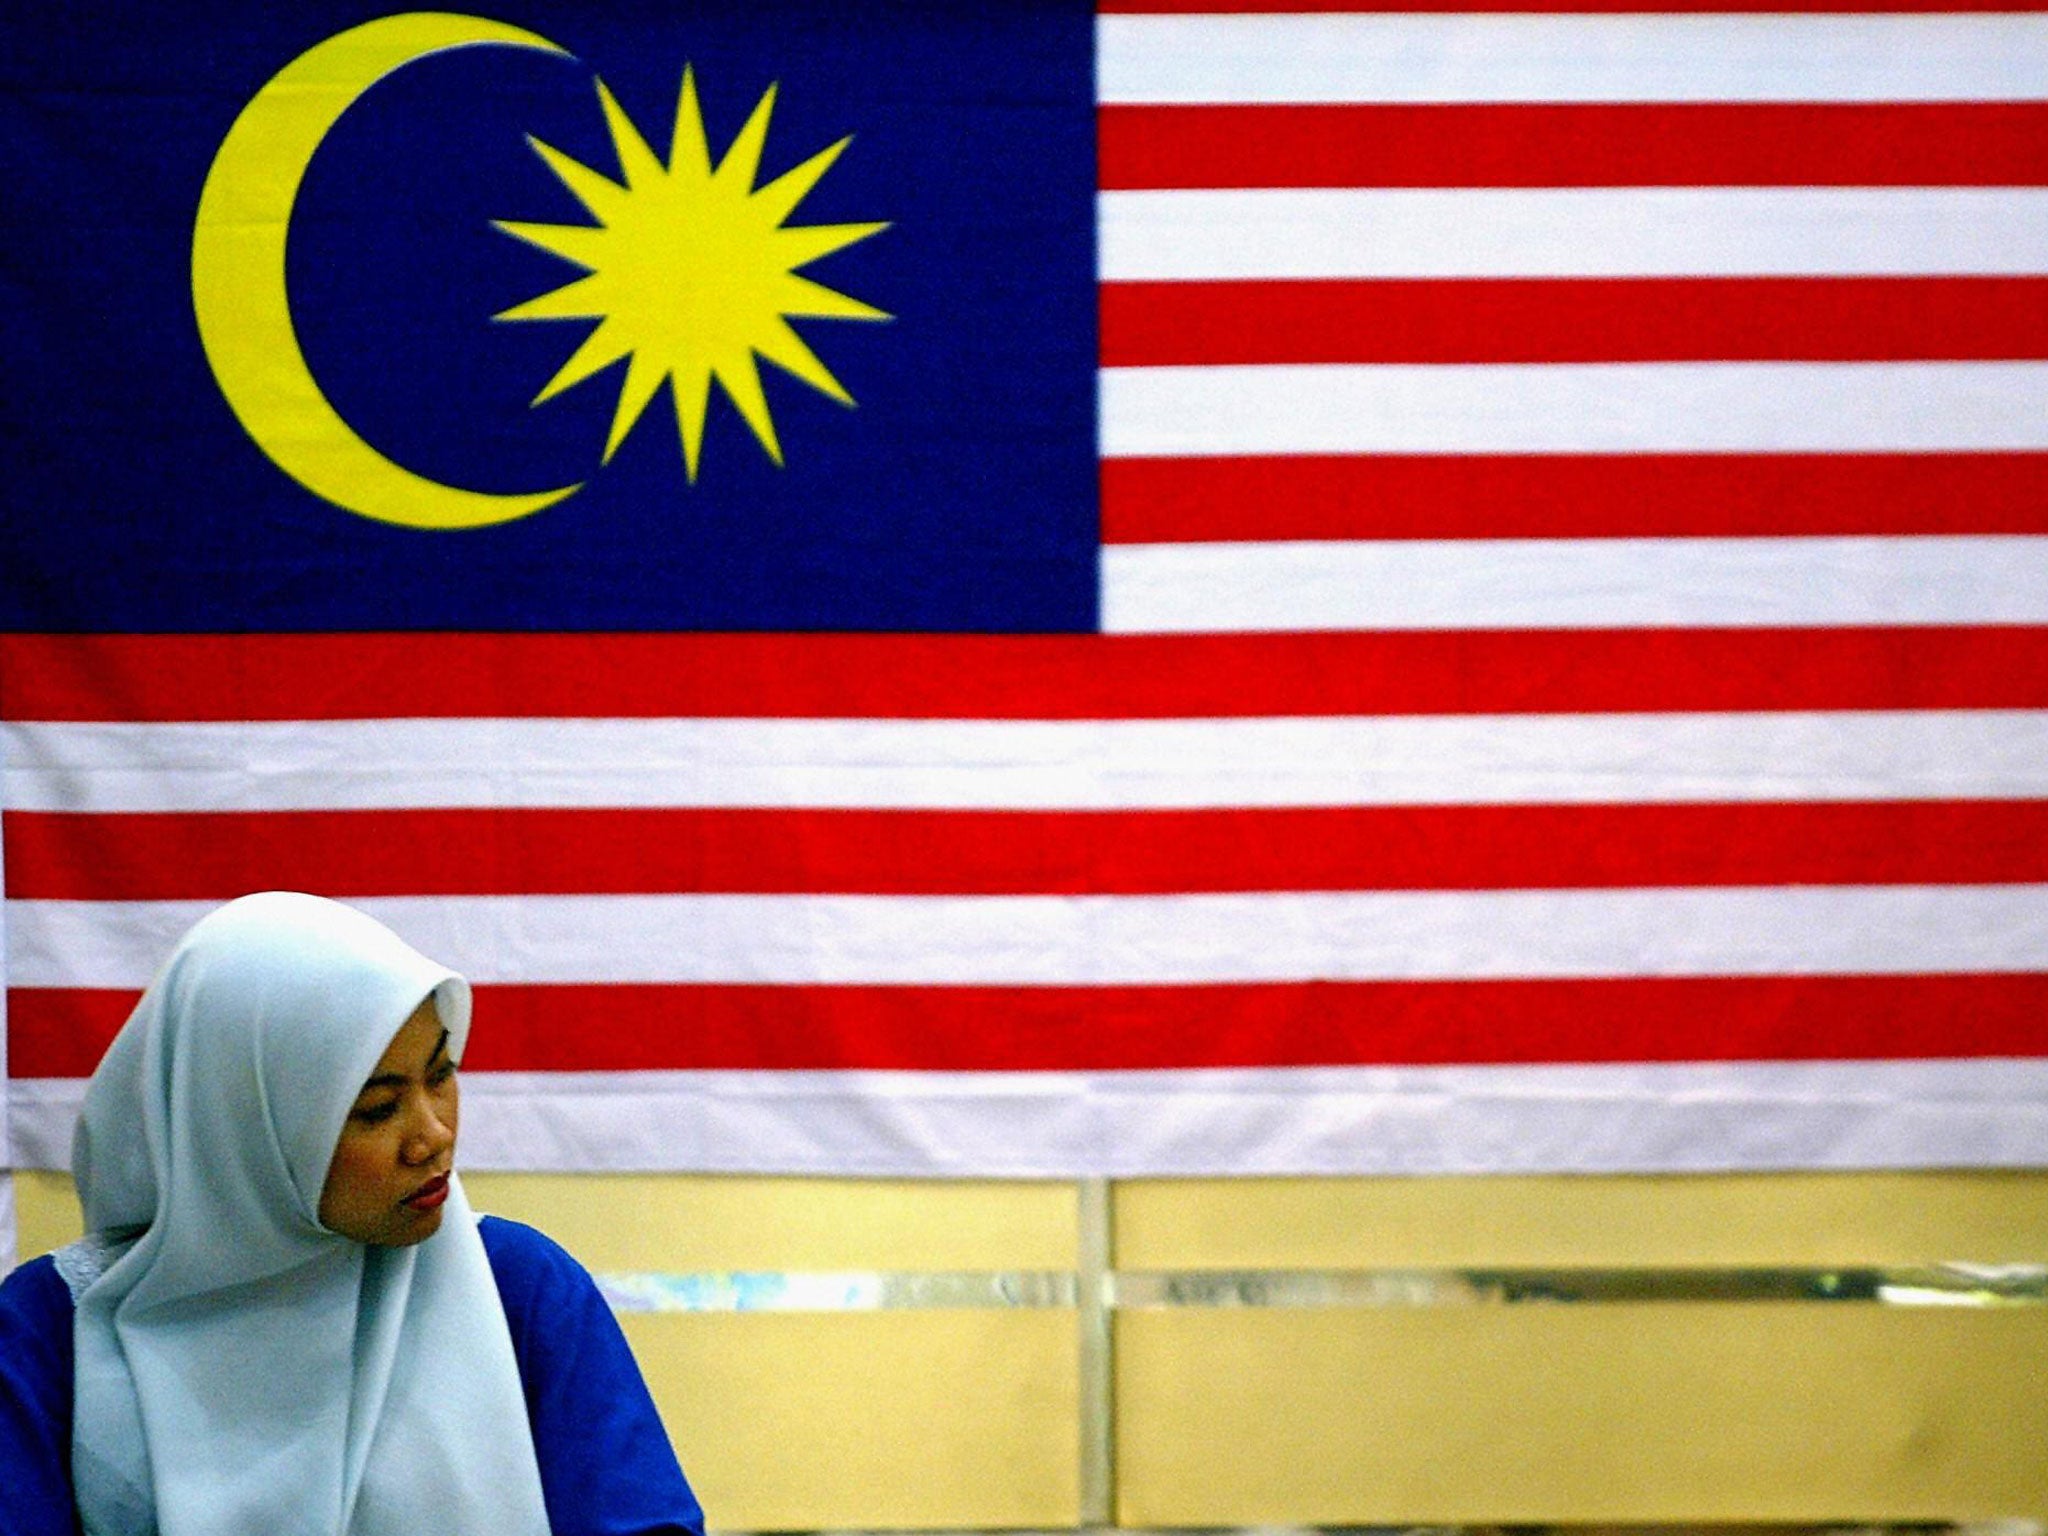 Malaysia is a multi-ethnic and multi-religious country where apostasy is not a federal crime